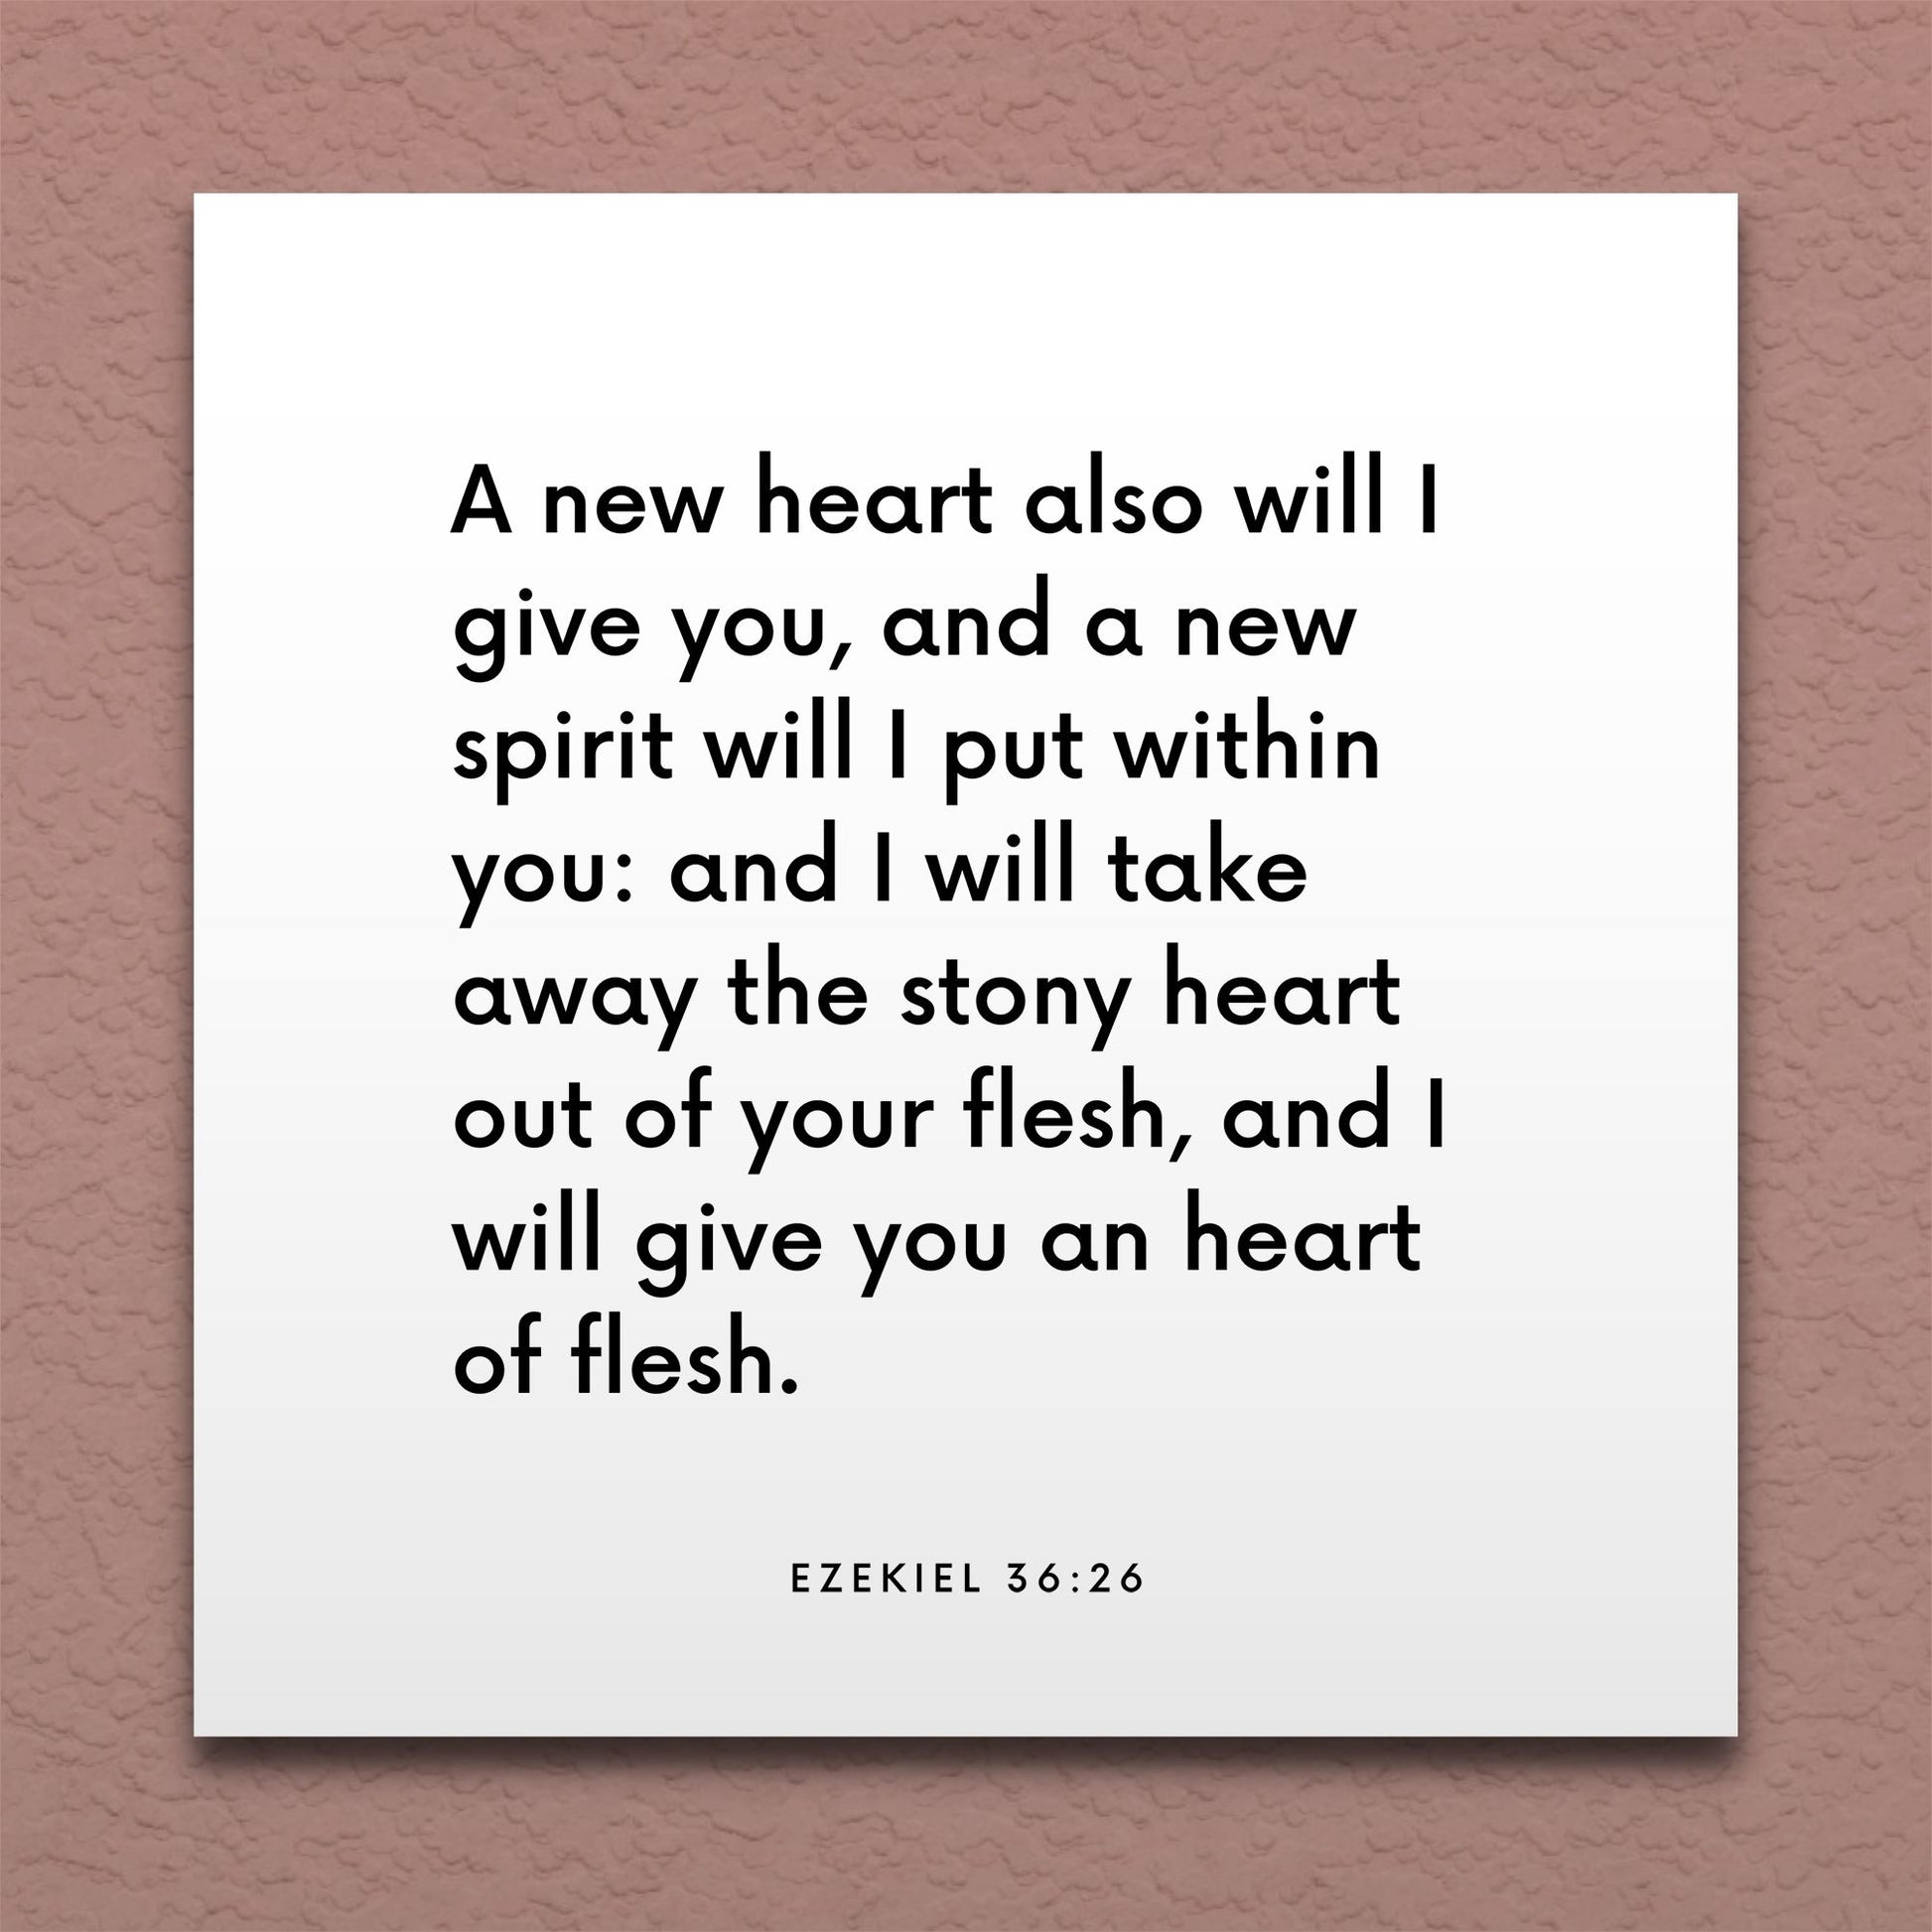 Wall-mounted scripture tile for Ezekiel 36:26 - "A new heart also will I give you, and a new spirit"